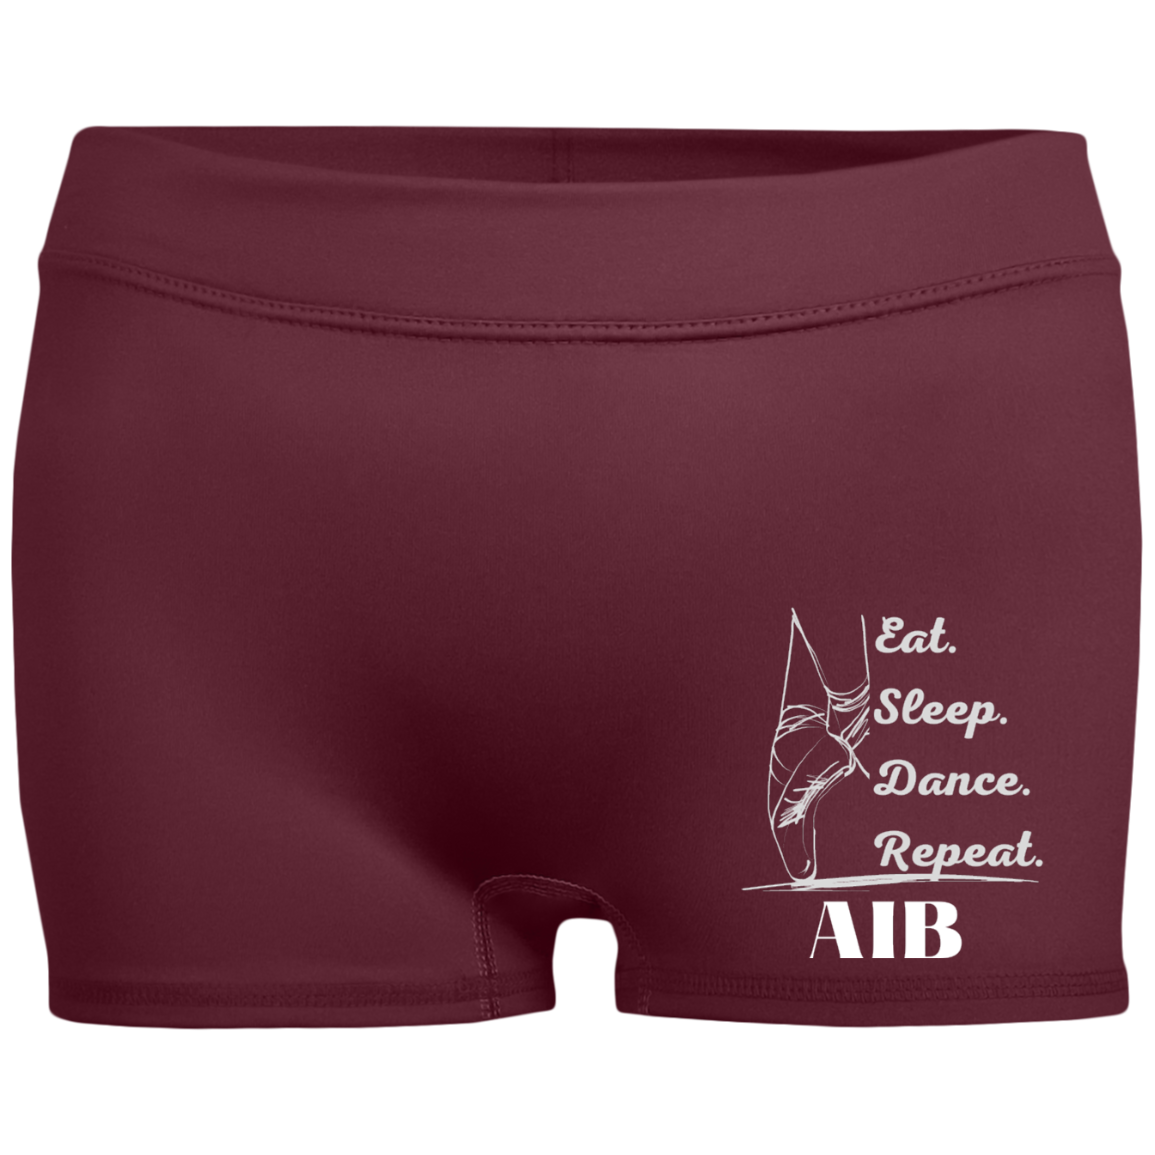 Eat. Sleep. Dance. Repeat. AIB- Ladies' Fitted Moisture-Wicking 2.5 inch Inseam Shorts